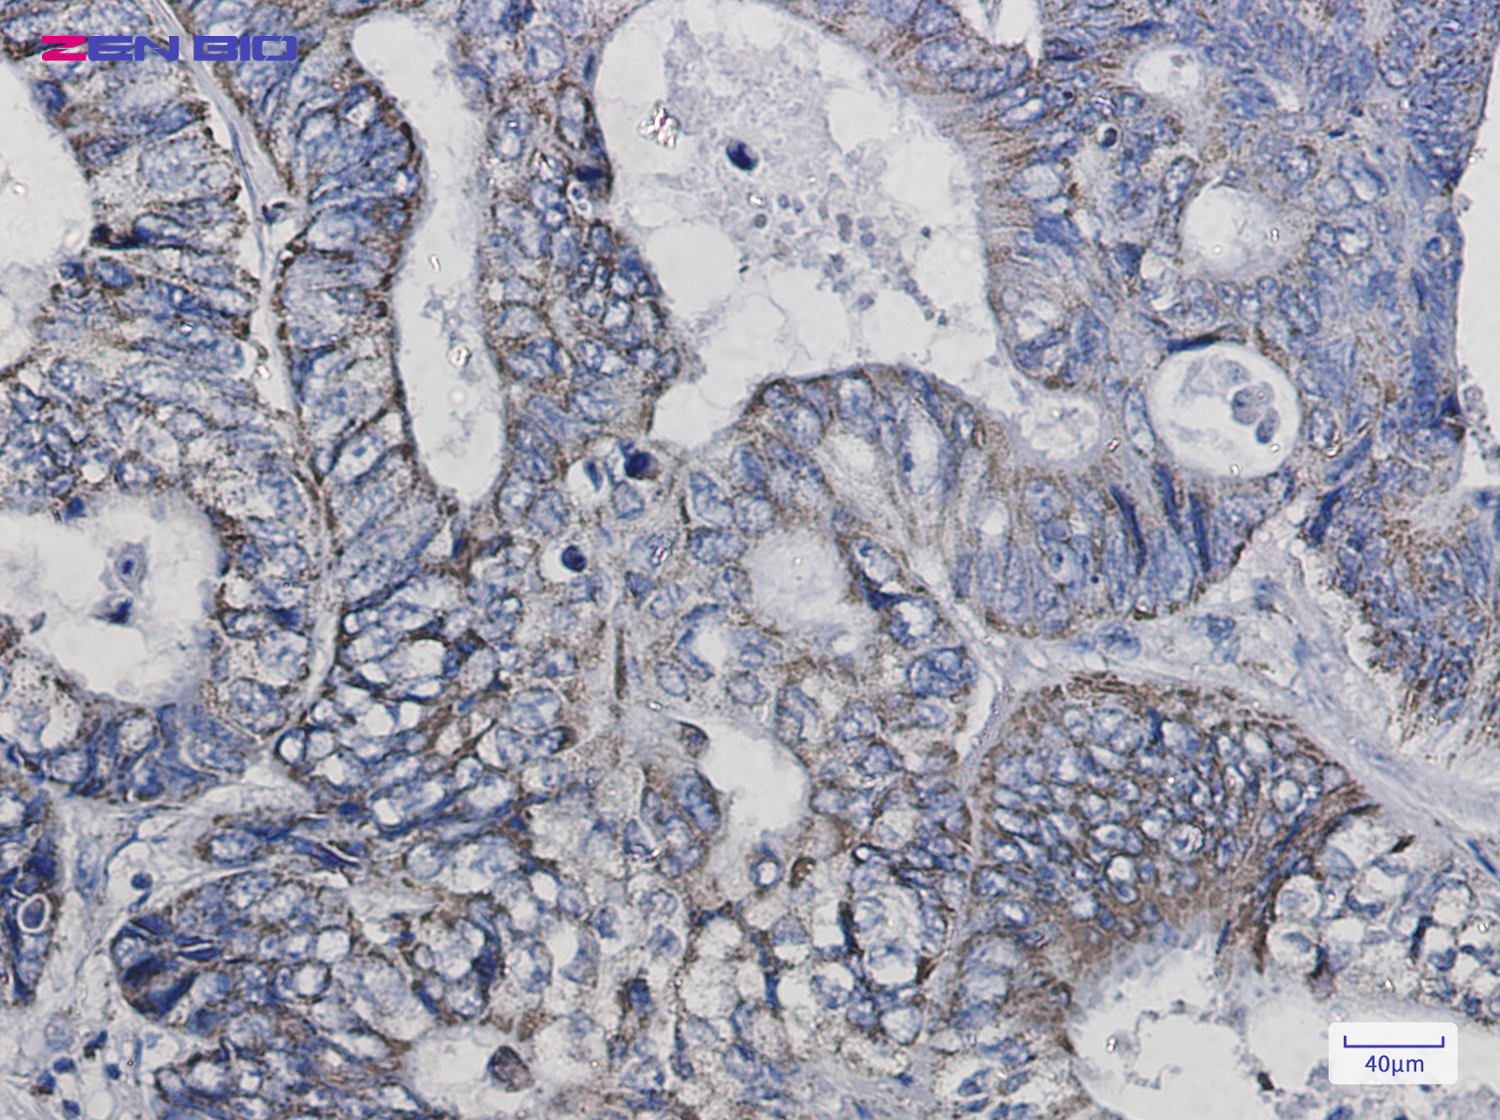 Immunohistochemistry of Thioredoxin 2 in paraffin-embedded Human colon cancer tissue using Thioredoxin 2 Rabbit pAb at dilution 1/50